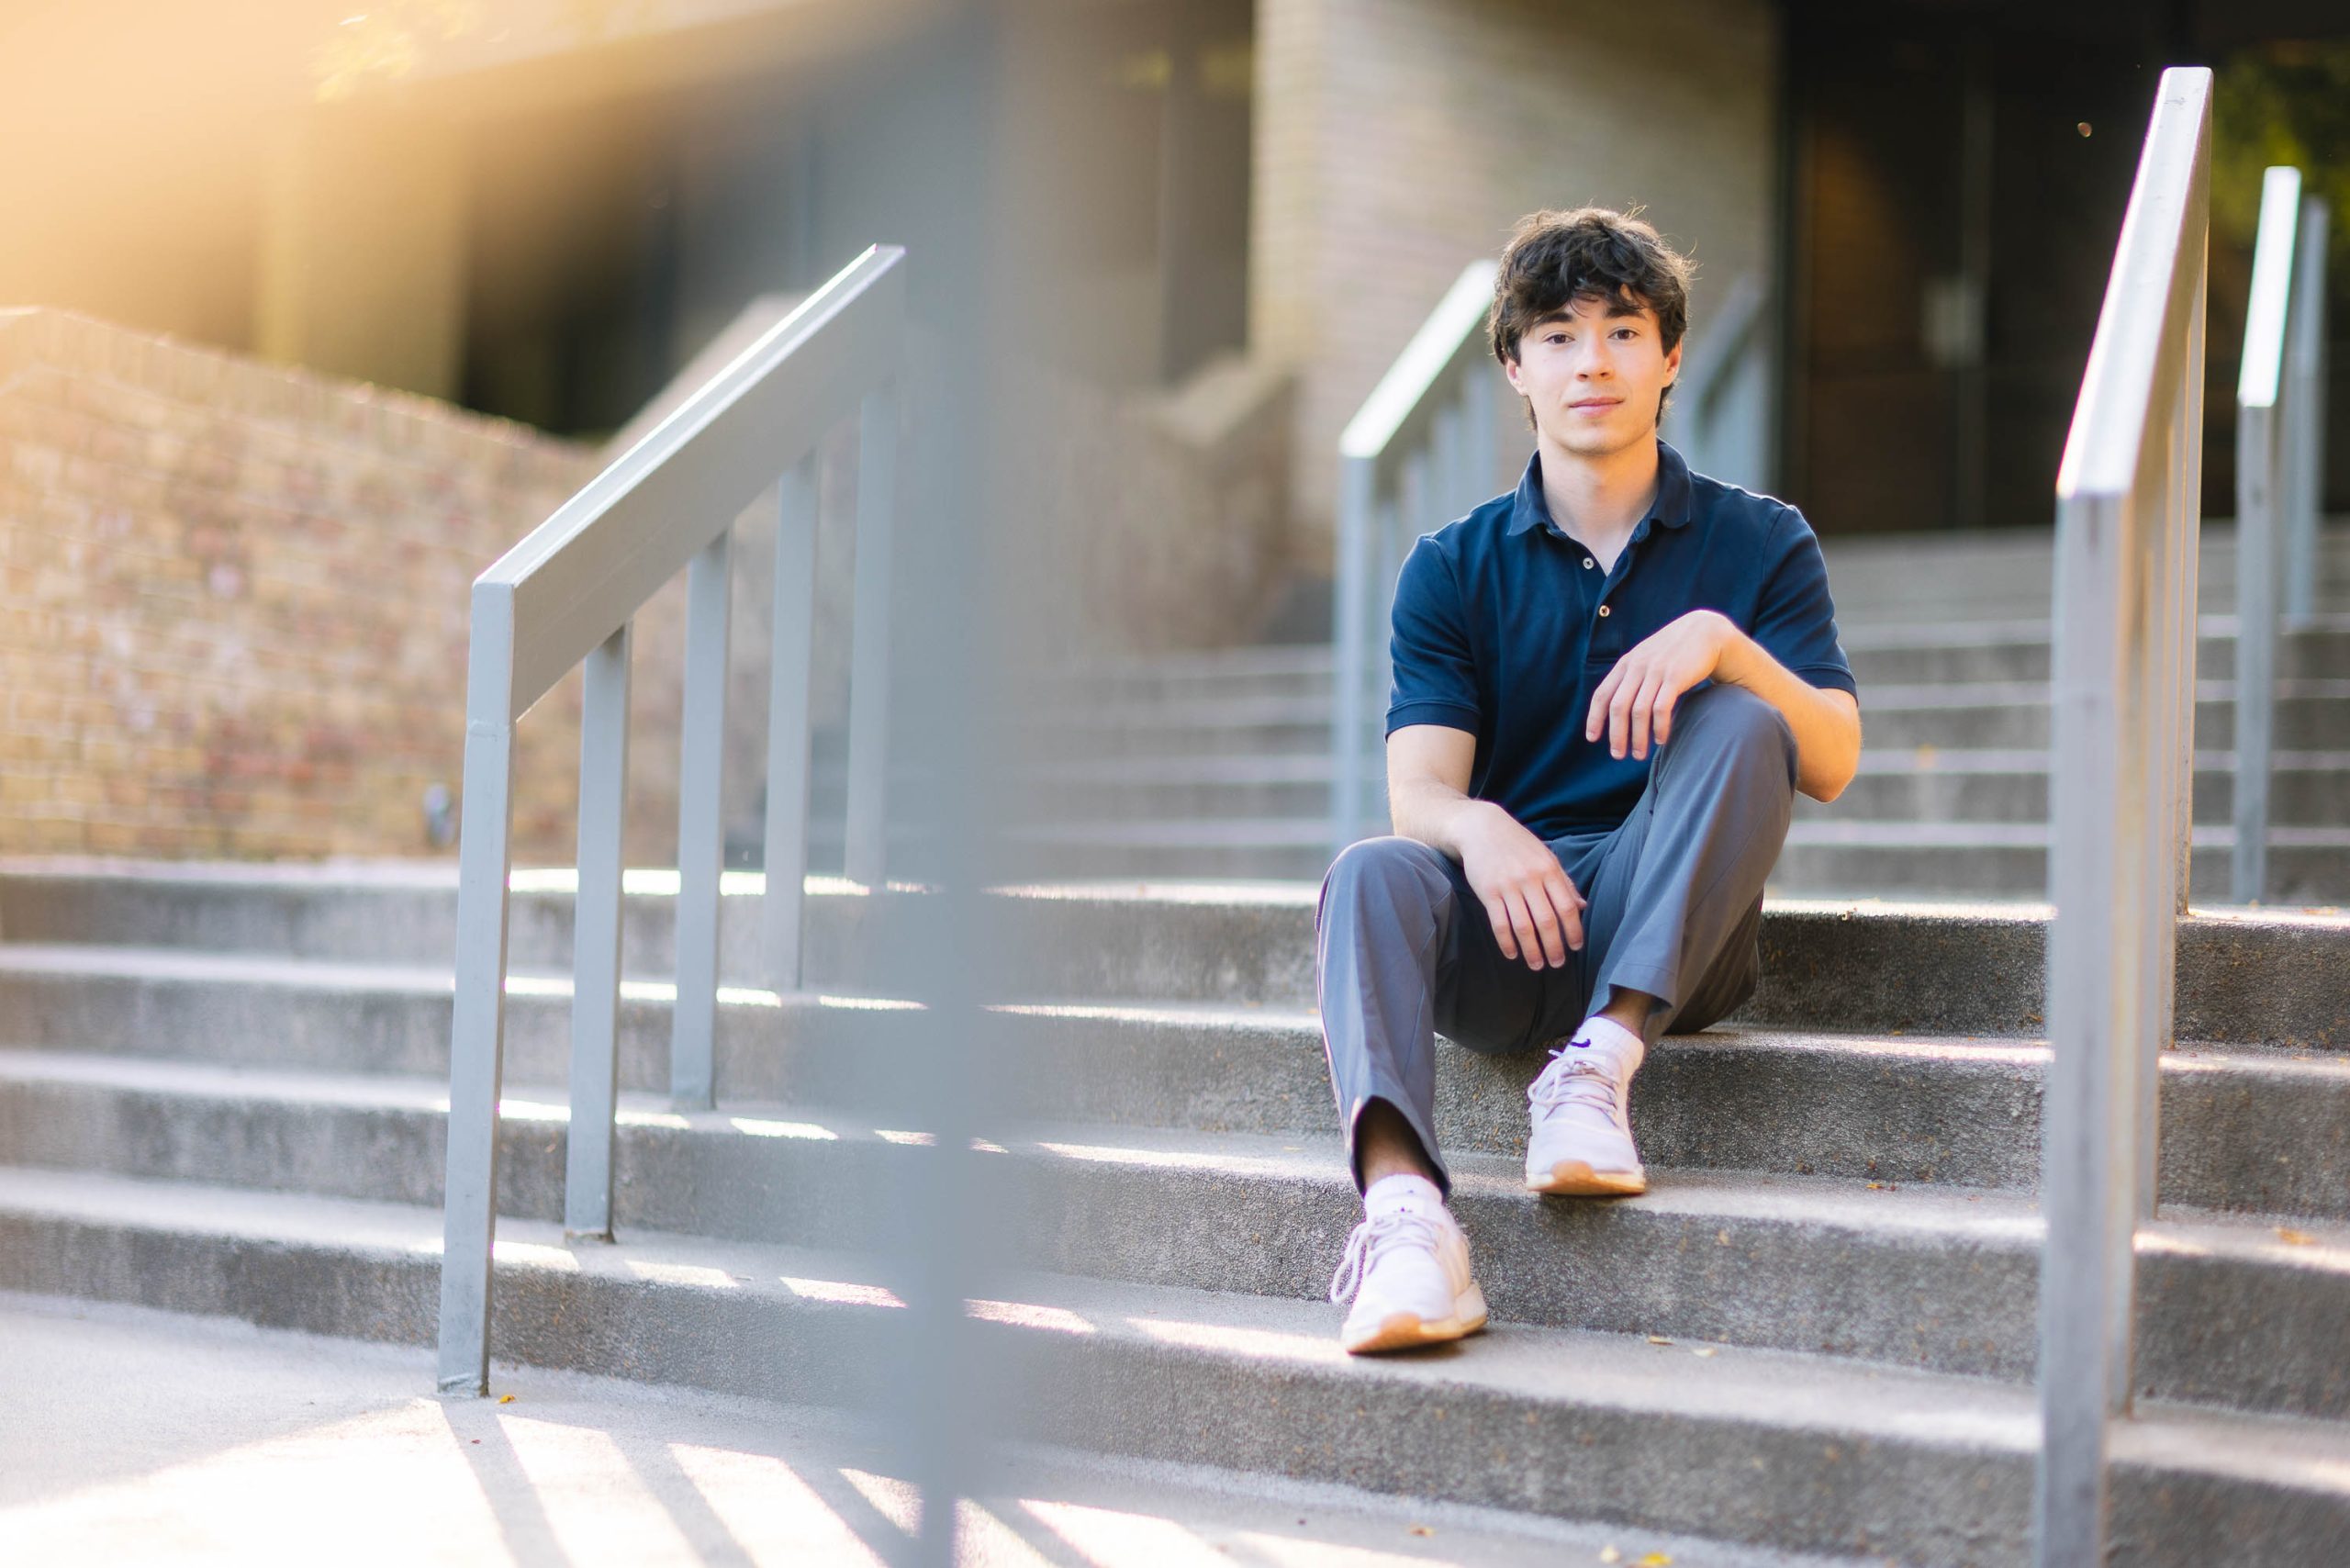 A senior graduate posing for a portrait on the steps of a building.